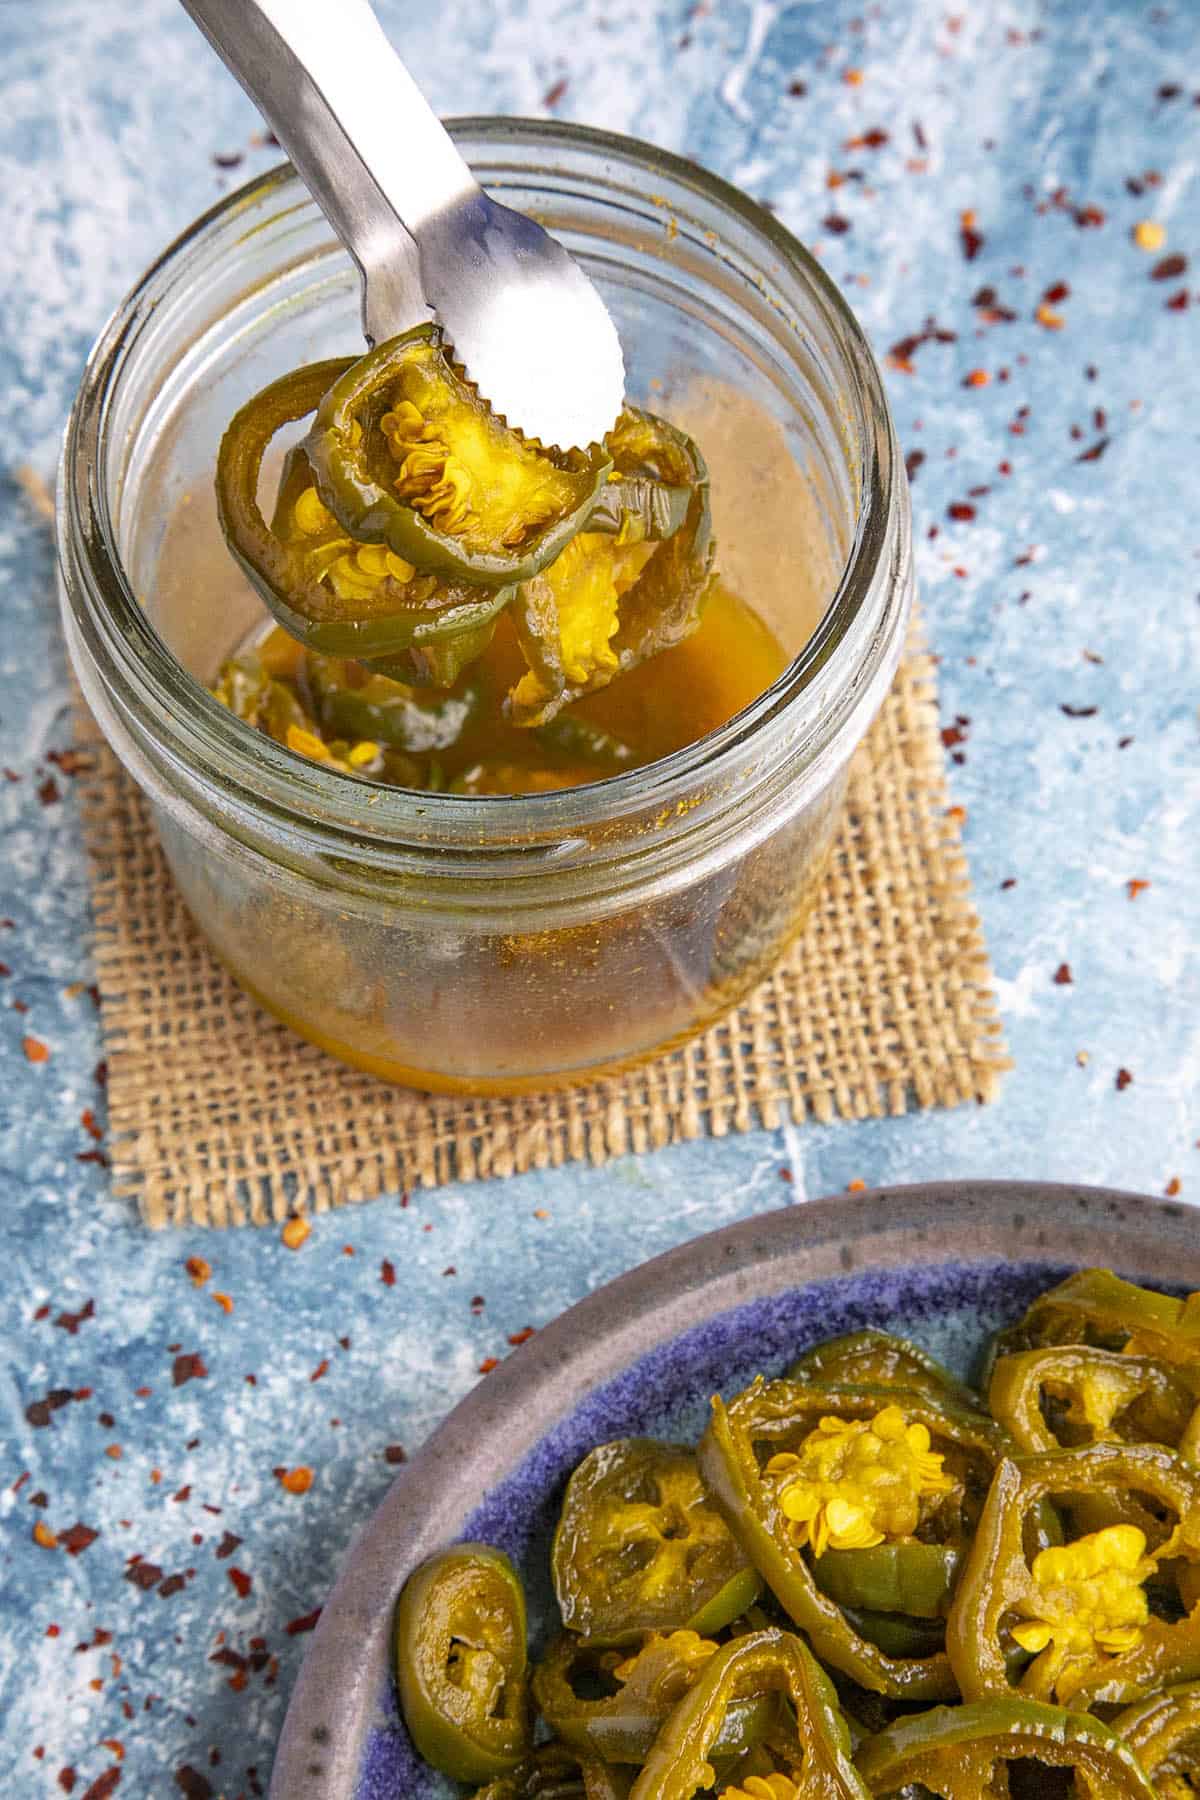 Picking Candied Jalapenos (Cowboy Candy) from a jar